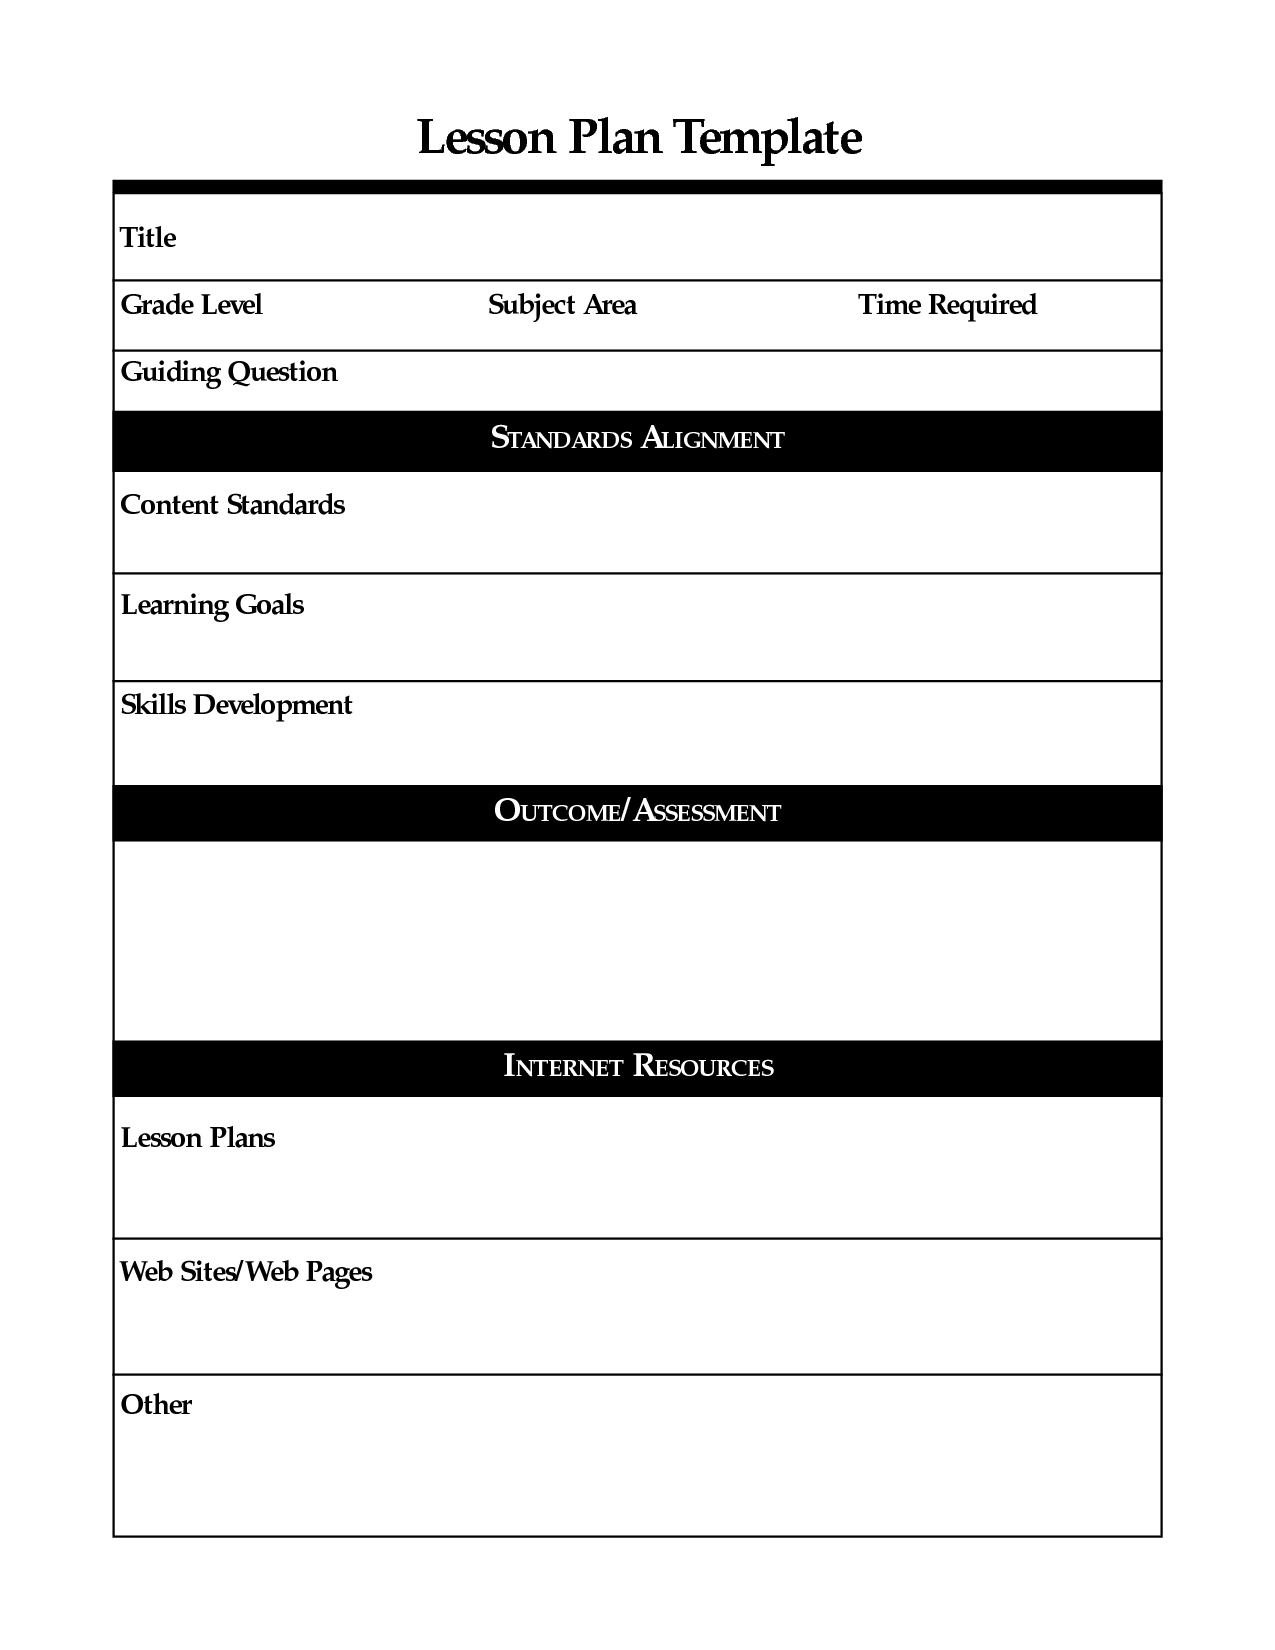 Basic Lesson Plan Template Englishlinx Com Back To Format Simple In intended for Basic Lesson Plan Template Printable